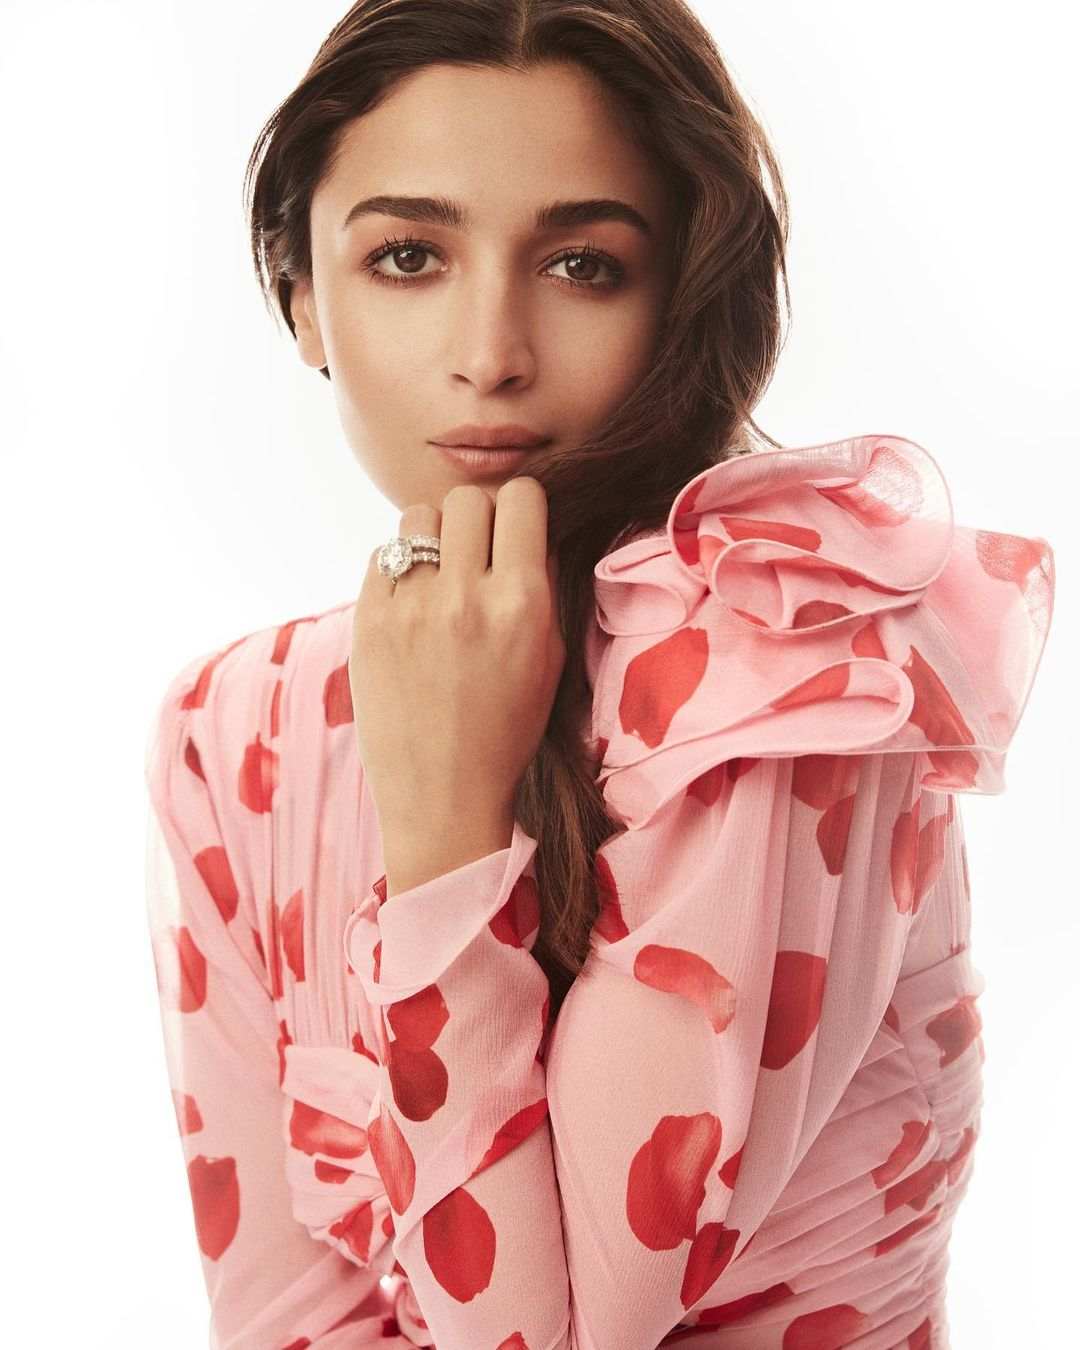 Alia Bhatt latest photoshoot after announcing pregnency 